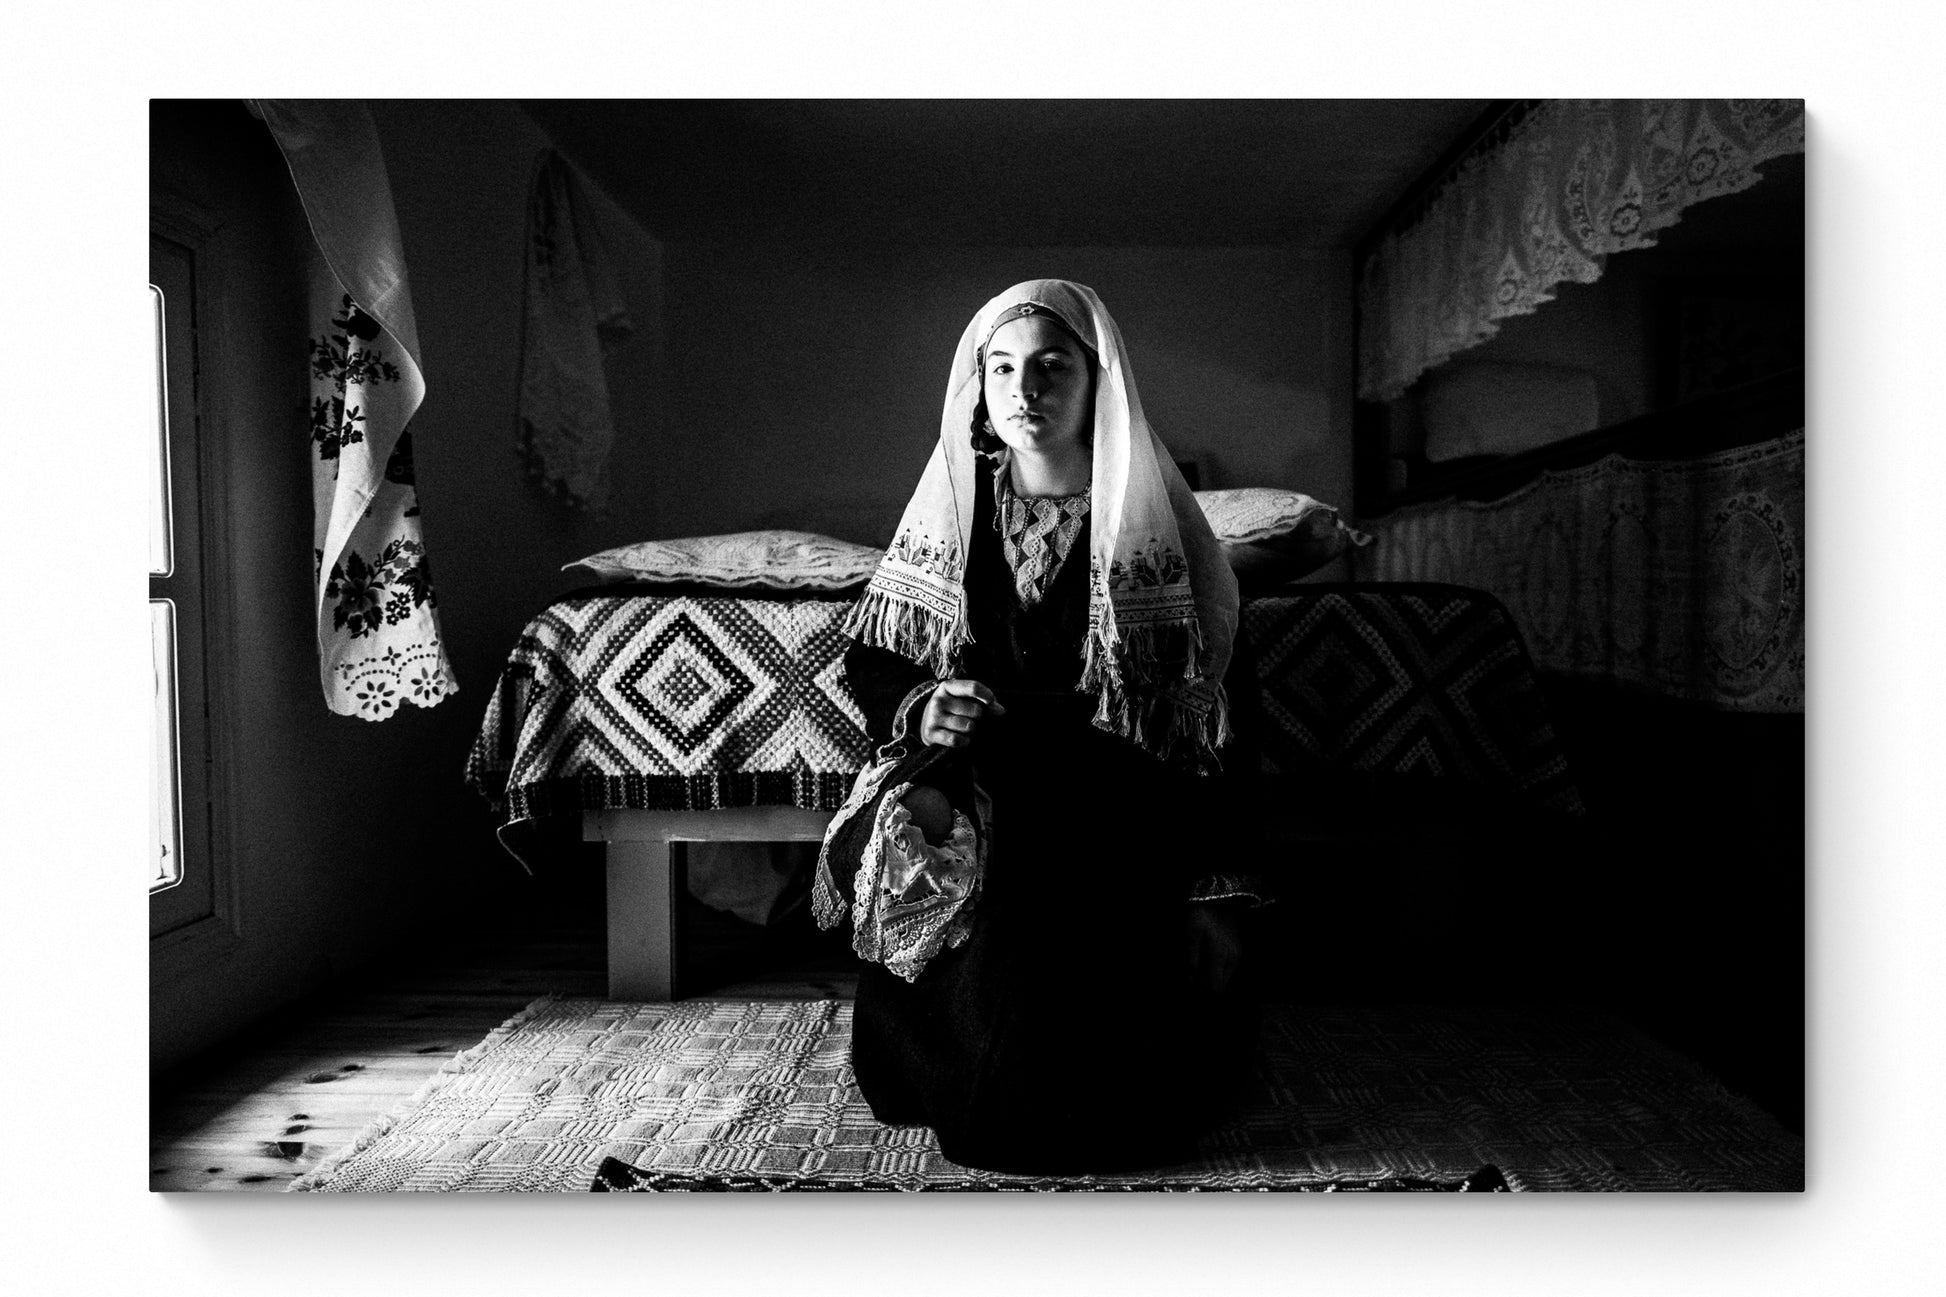 Black and White Photography Wall Art Greece | Costume of Tilos island inside a traditional home Dodecanese Greece by George Tatakis - whole photo